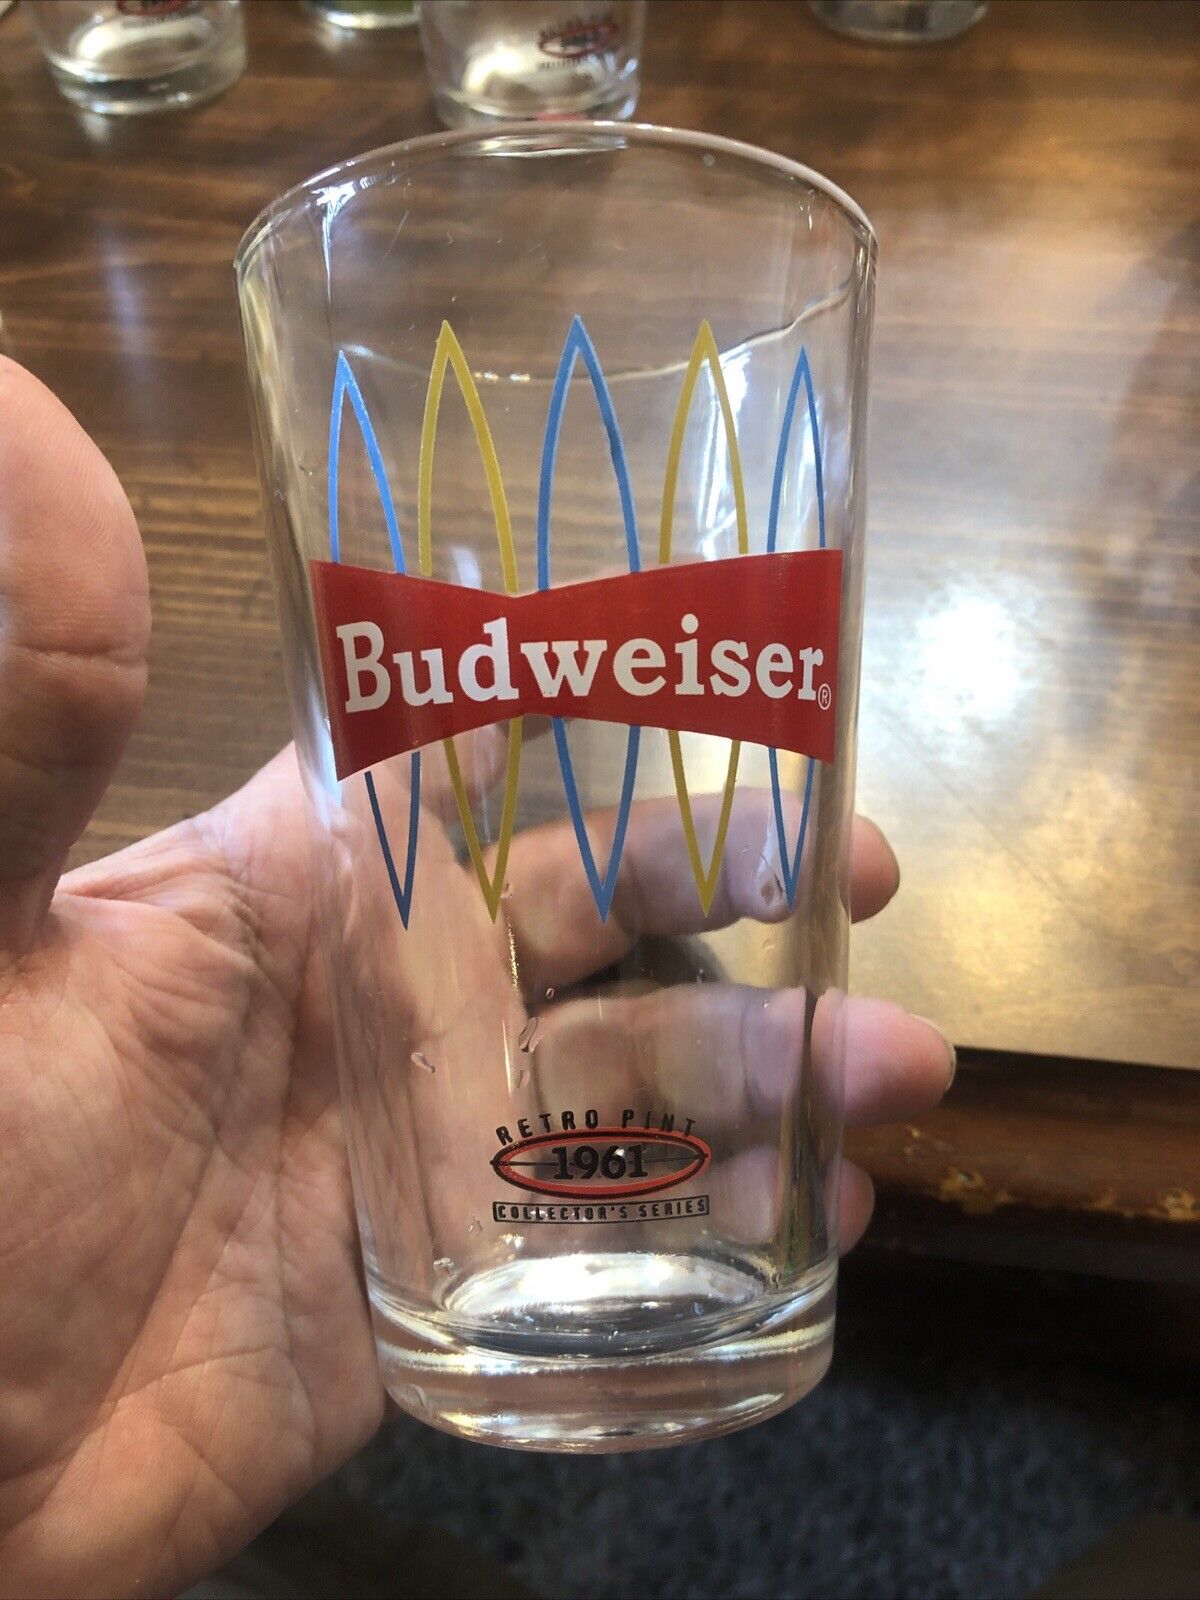 BUDWEISER 1961 Collector's Series Retro Beer Pint Glass